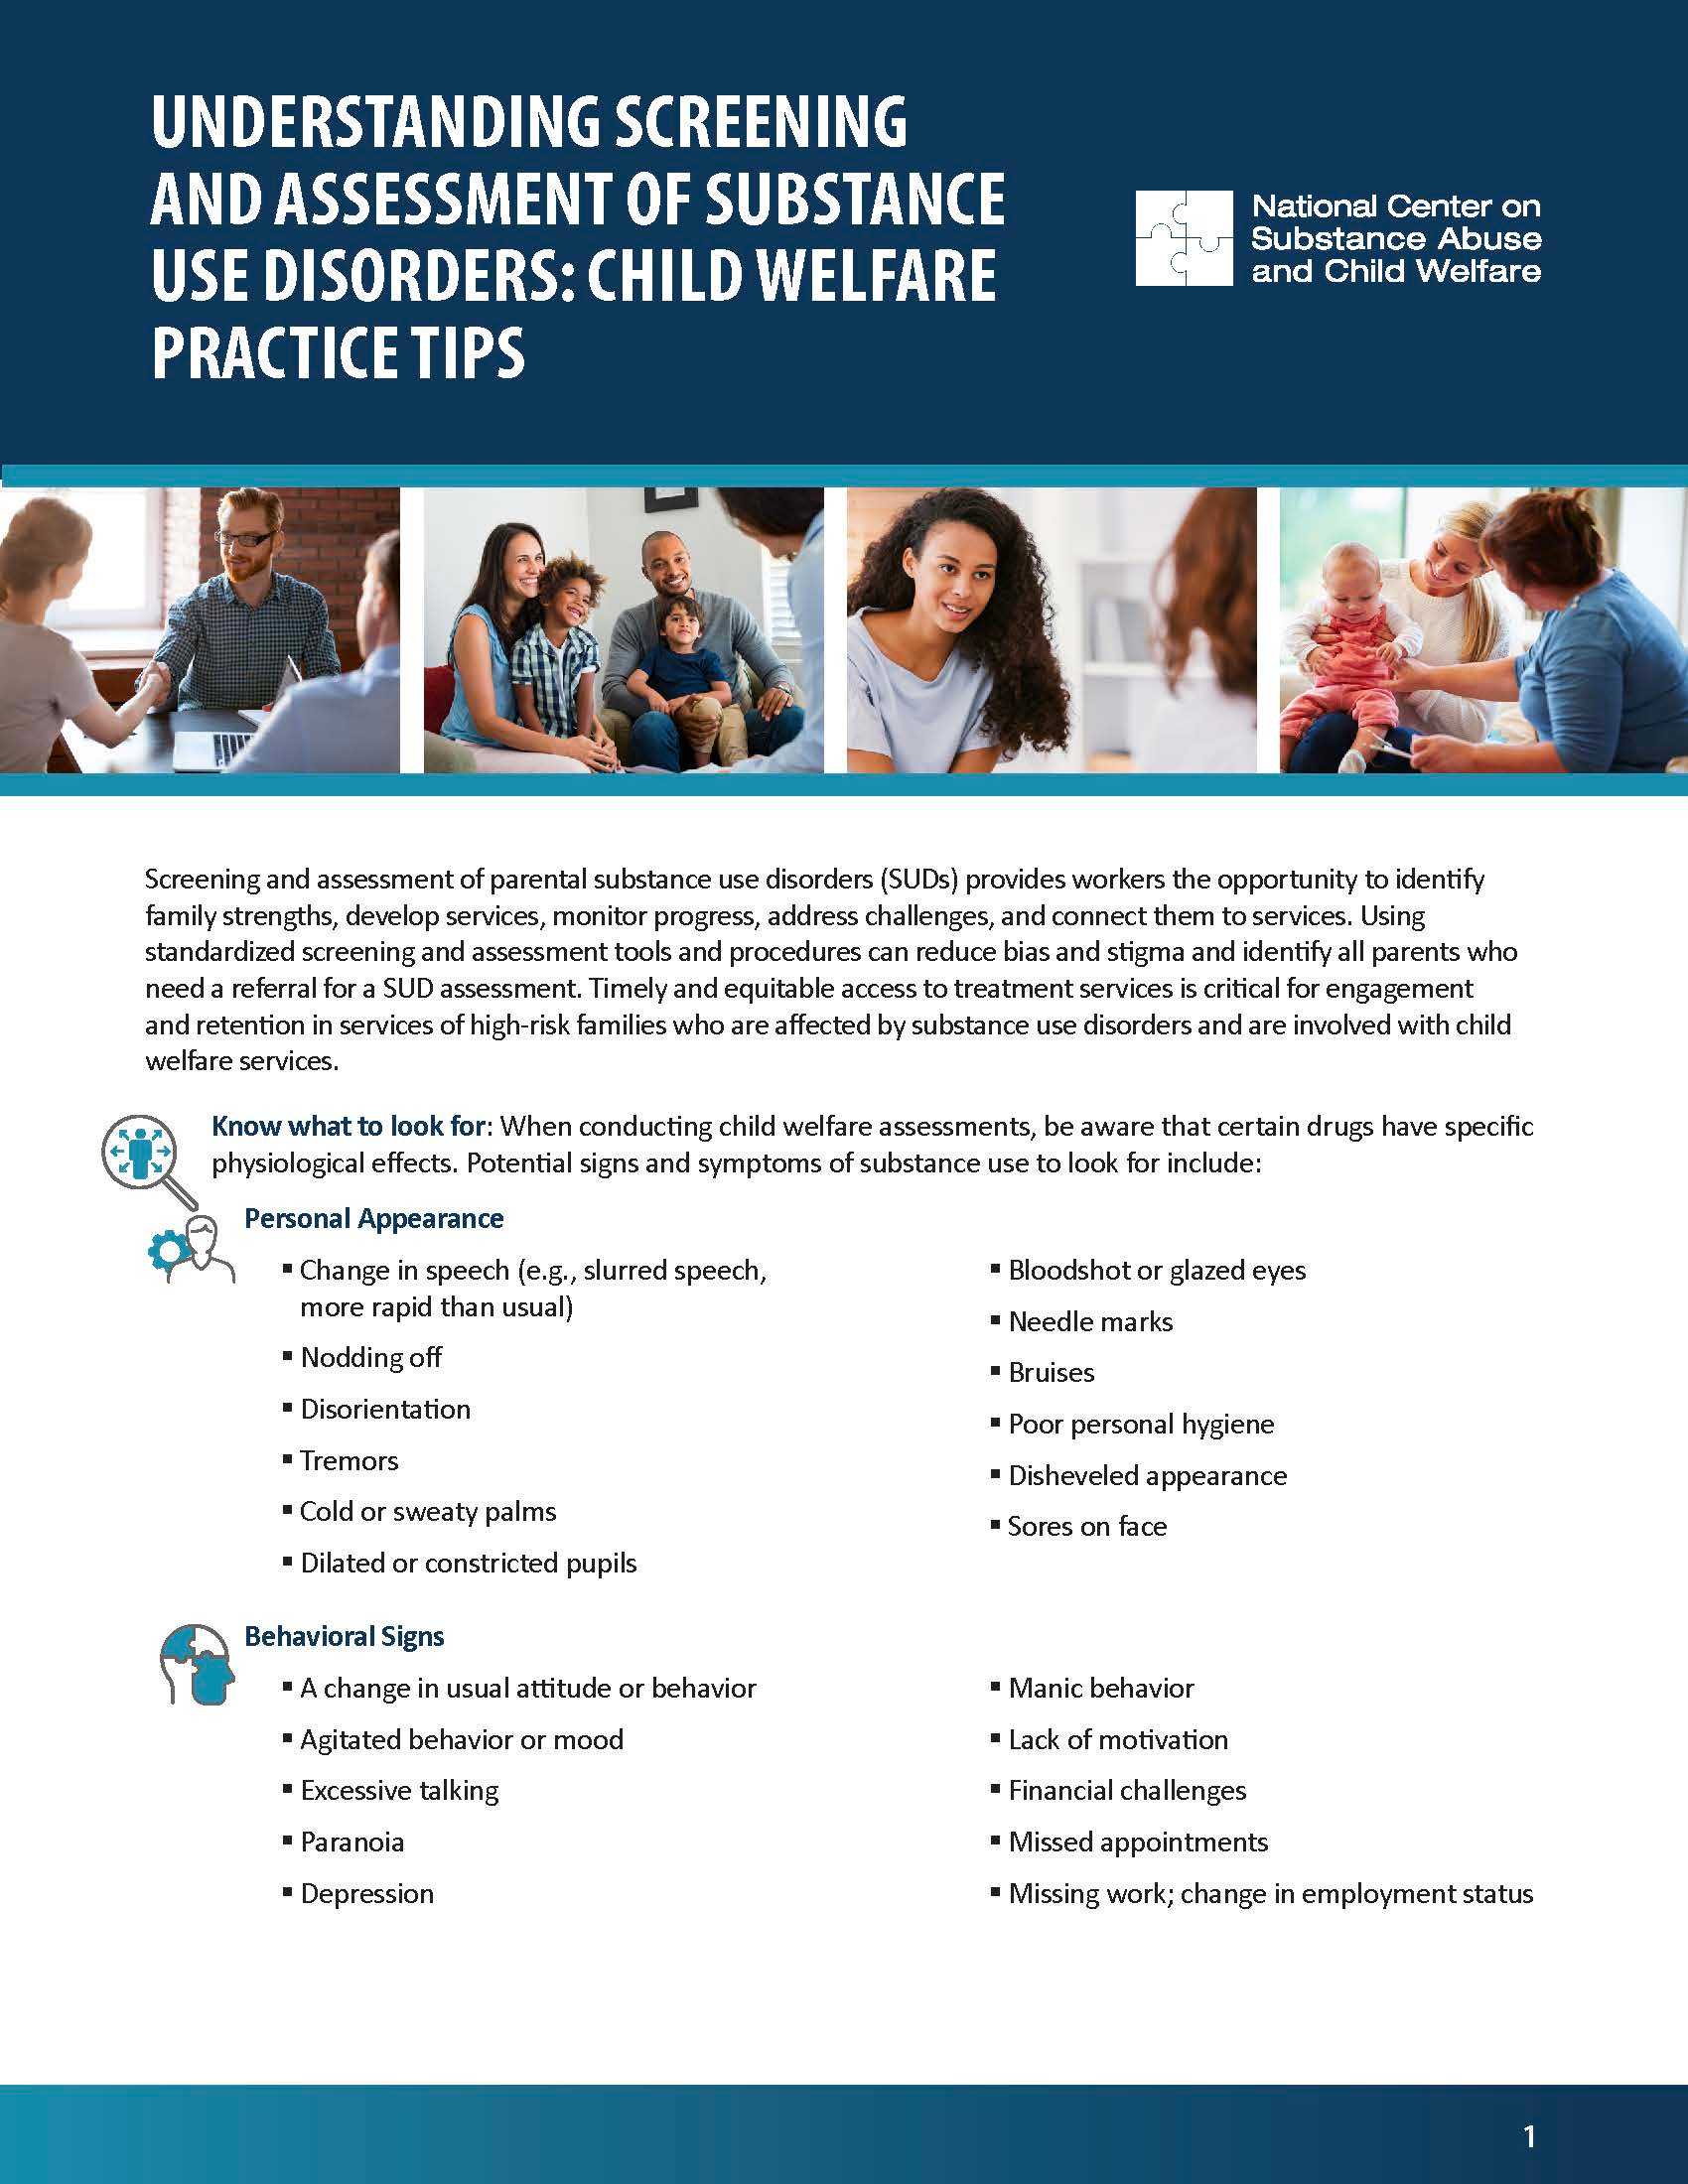 Understanding Screening and Assessment of Substance Use Disorders - Child Welfare Practice Tips